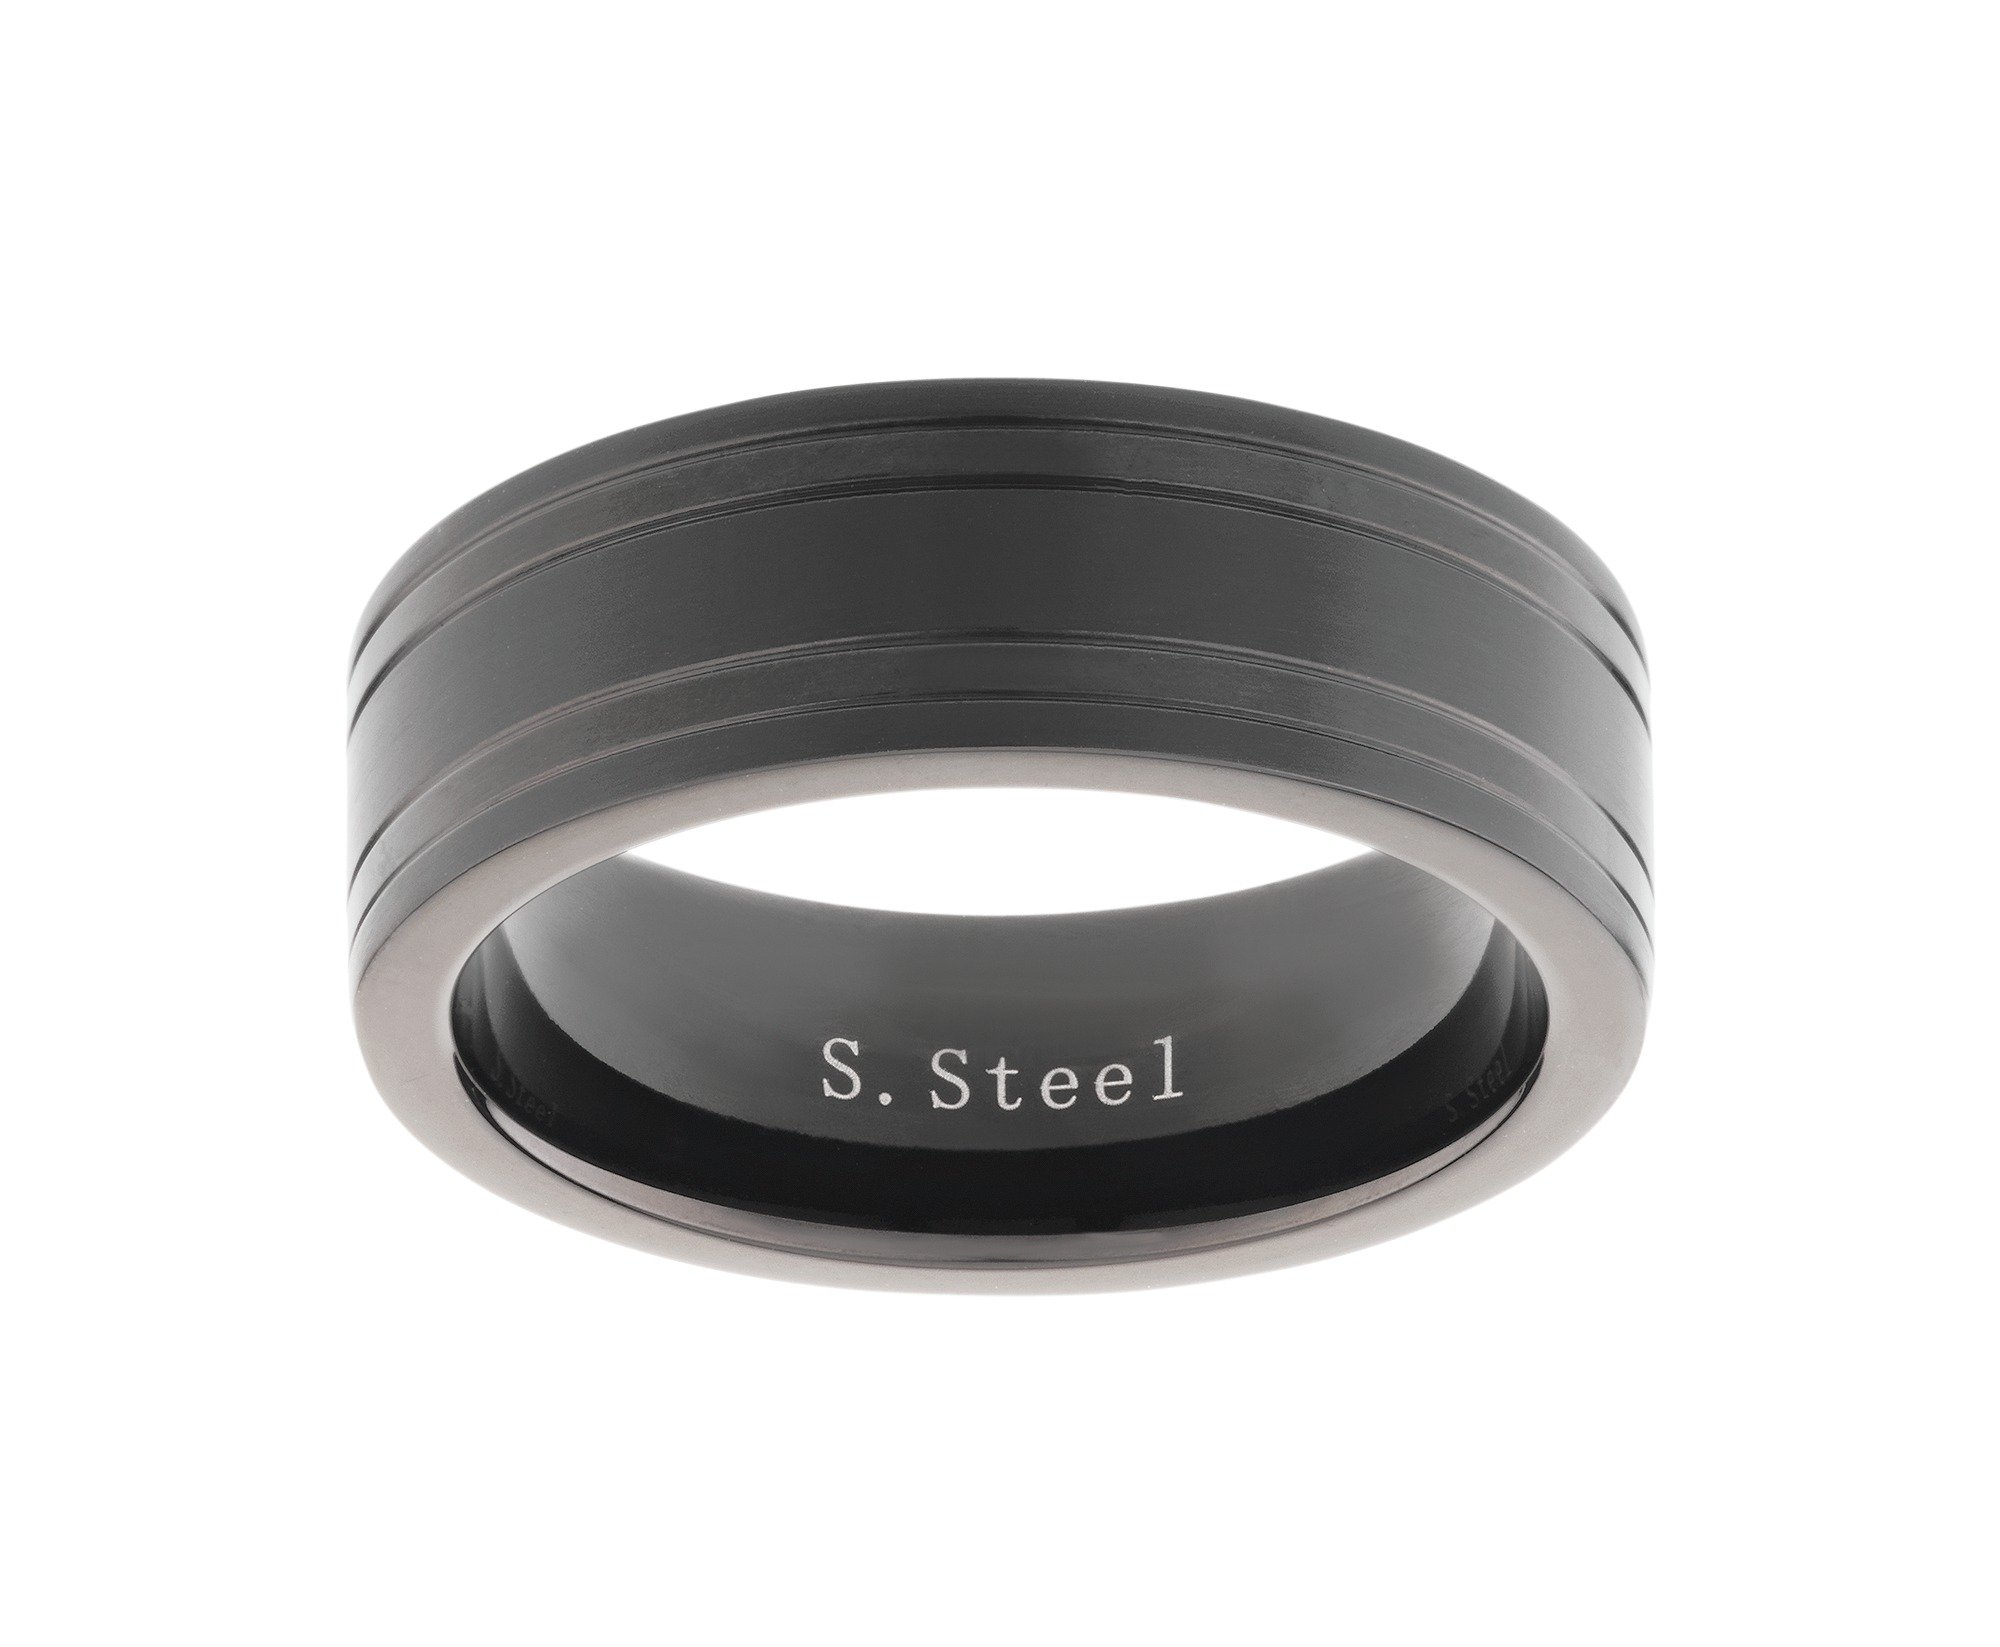 Stainless Steel Black 2 Groove Ring. Review